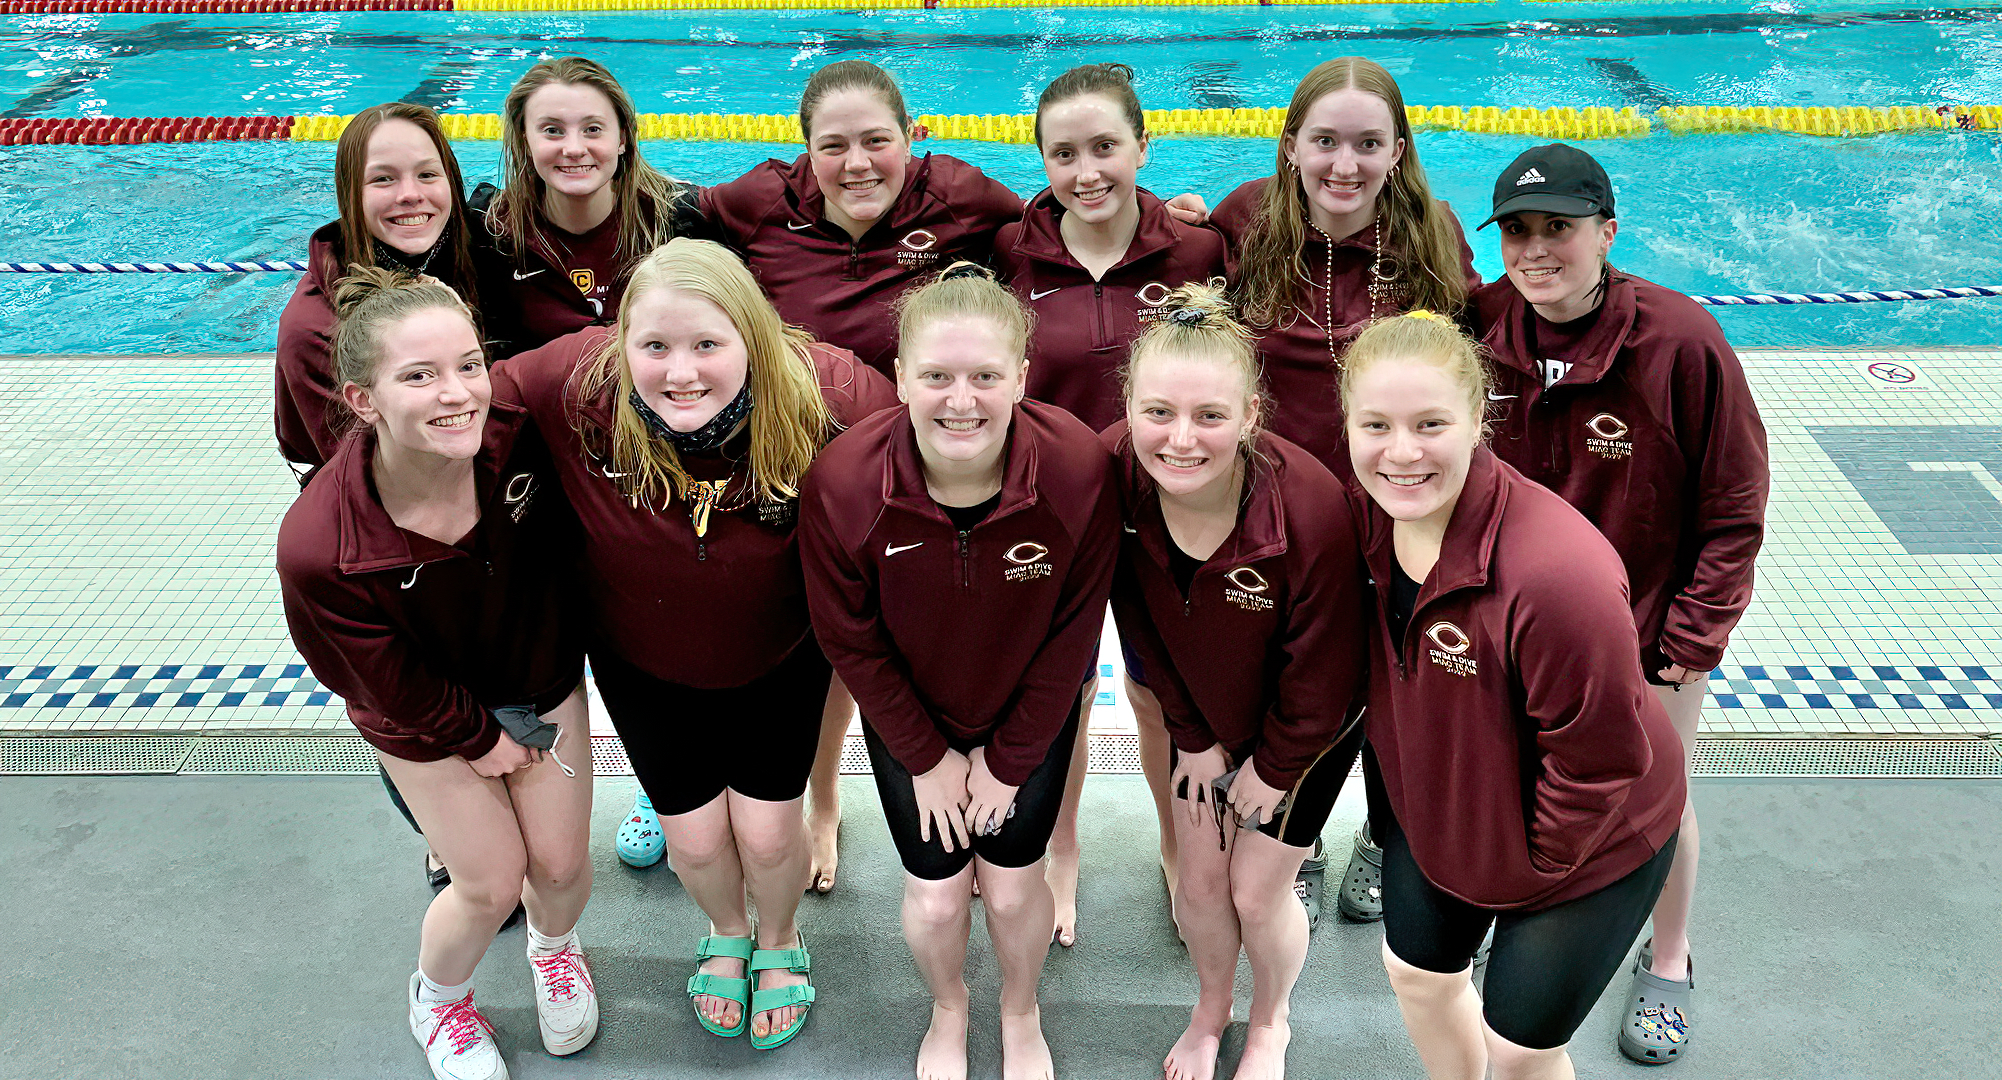 The Cobbers pose for a picture before the start of the 4-day MIAC Championship Meet. Both of CC's relays posted season-best times on Thursday,